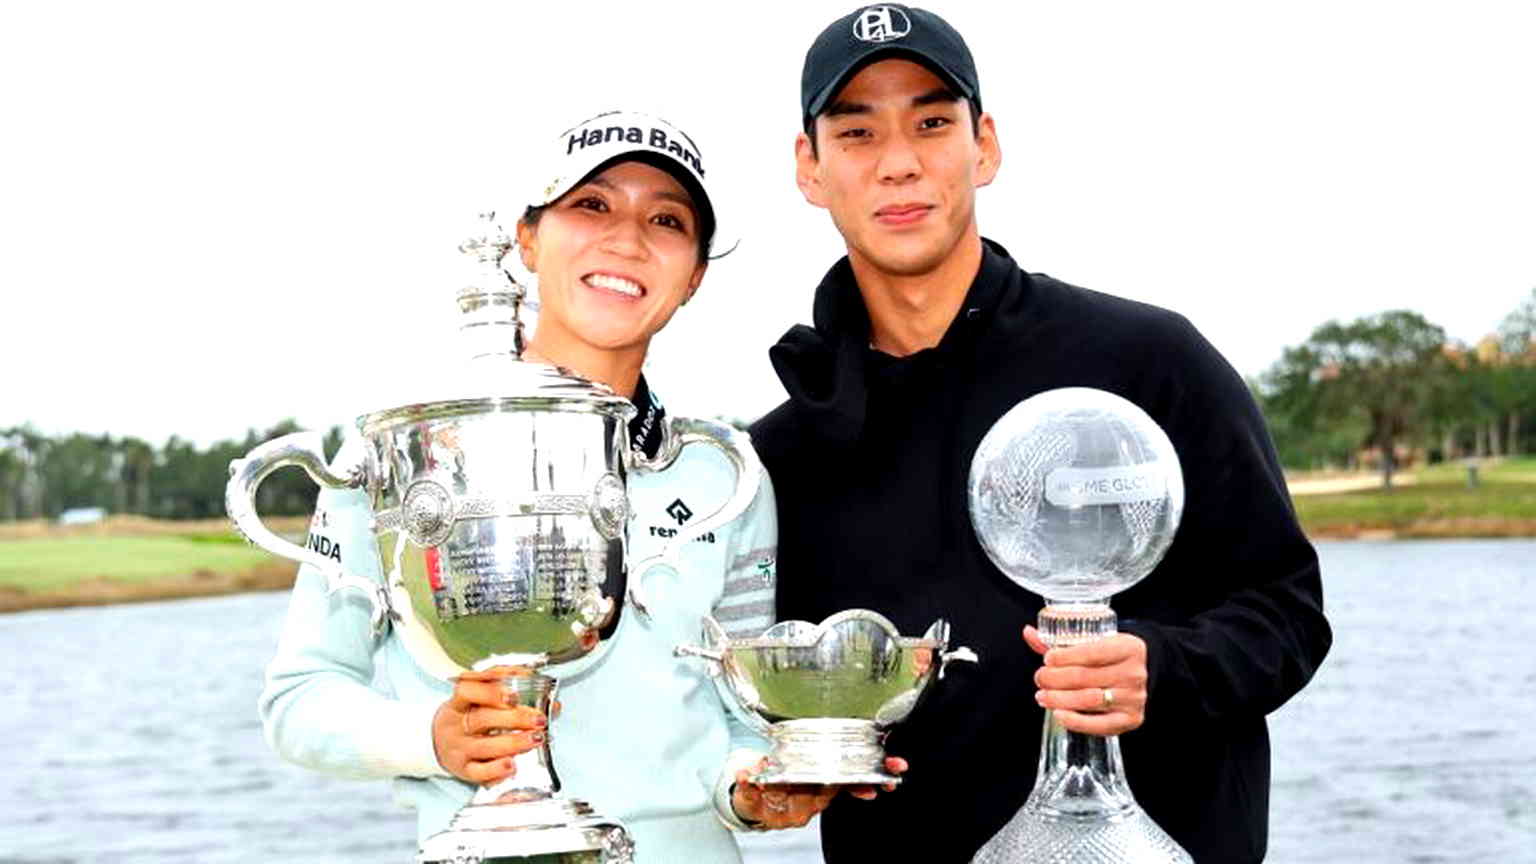 Top female golfer in the world Lydia Ko ends 2022 by getting married